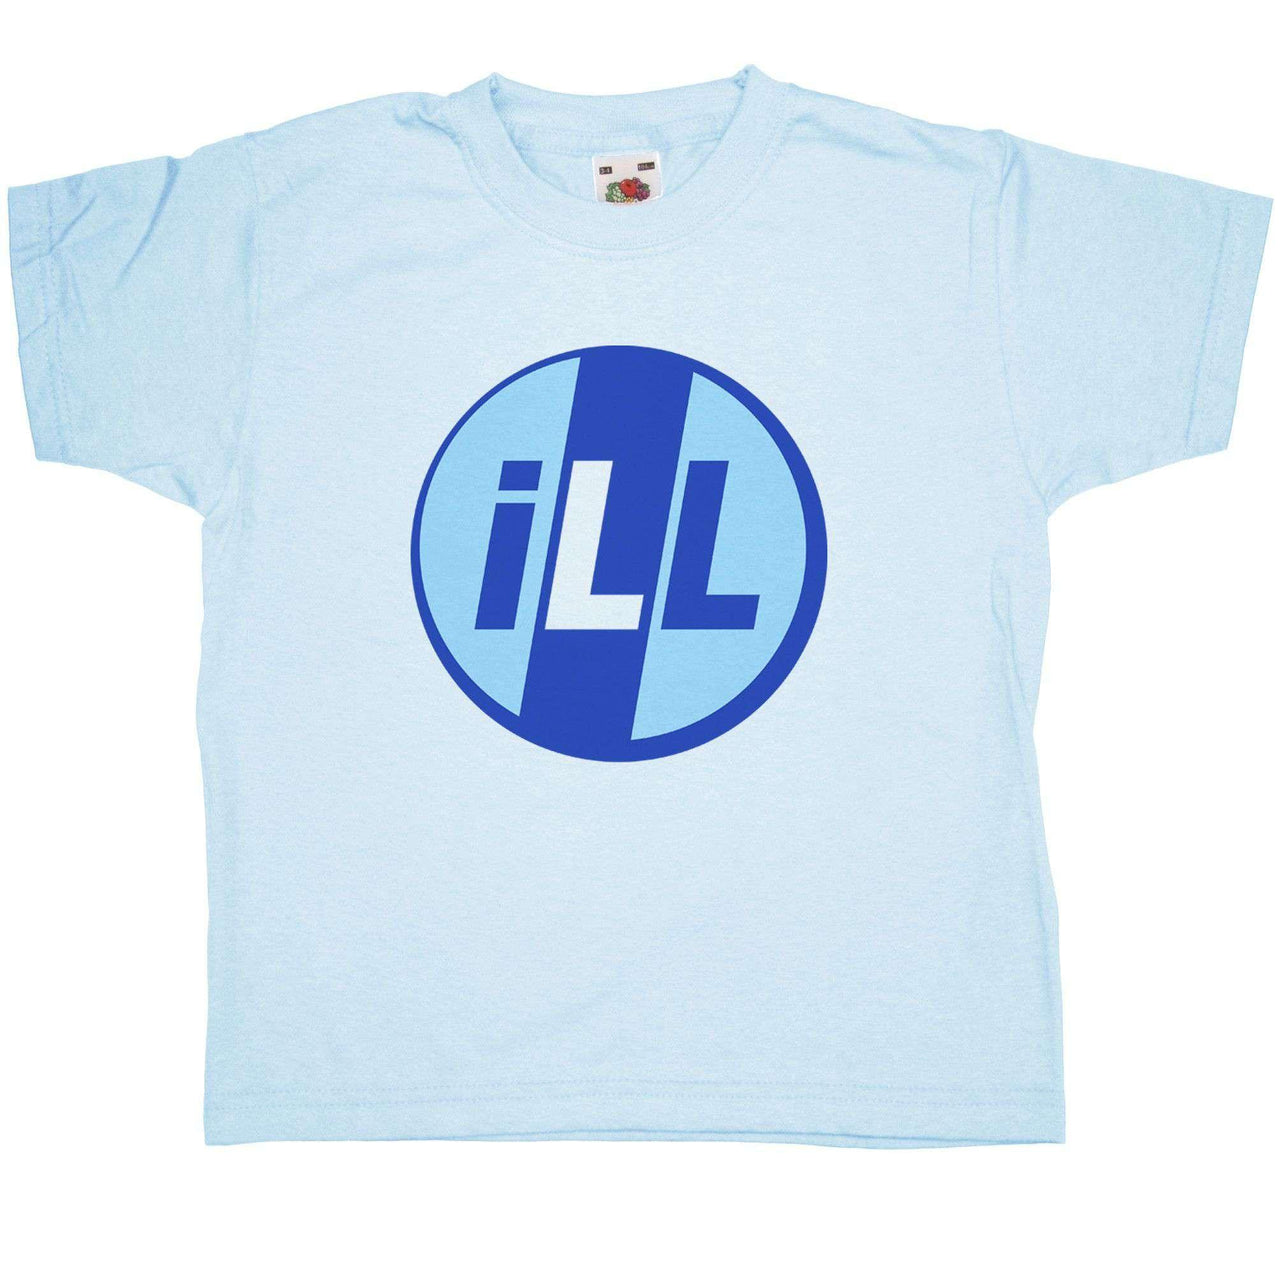 Circular Ill Logo Childrens Graphic T-Shirt As Worn By Mike D 8Ball